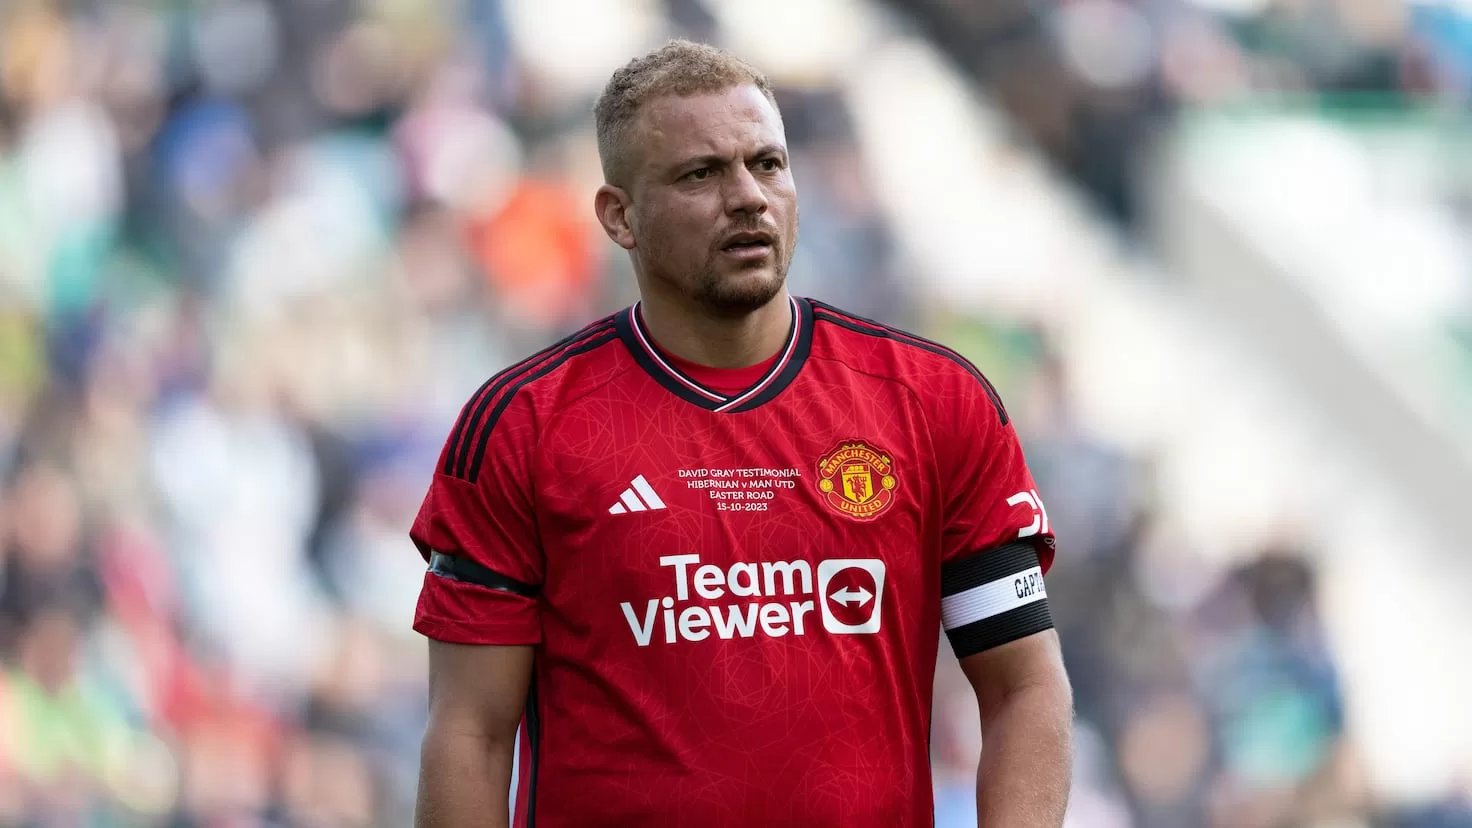 Wes Brown: from winning 7 Premiers and 2 Champions, to bankruptcy
